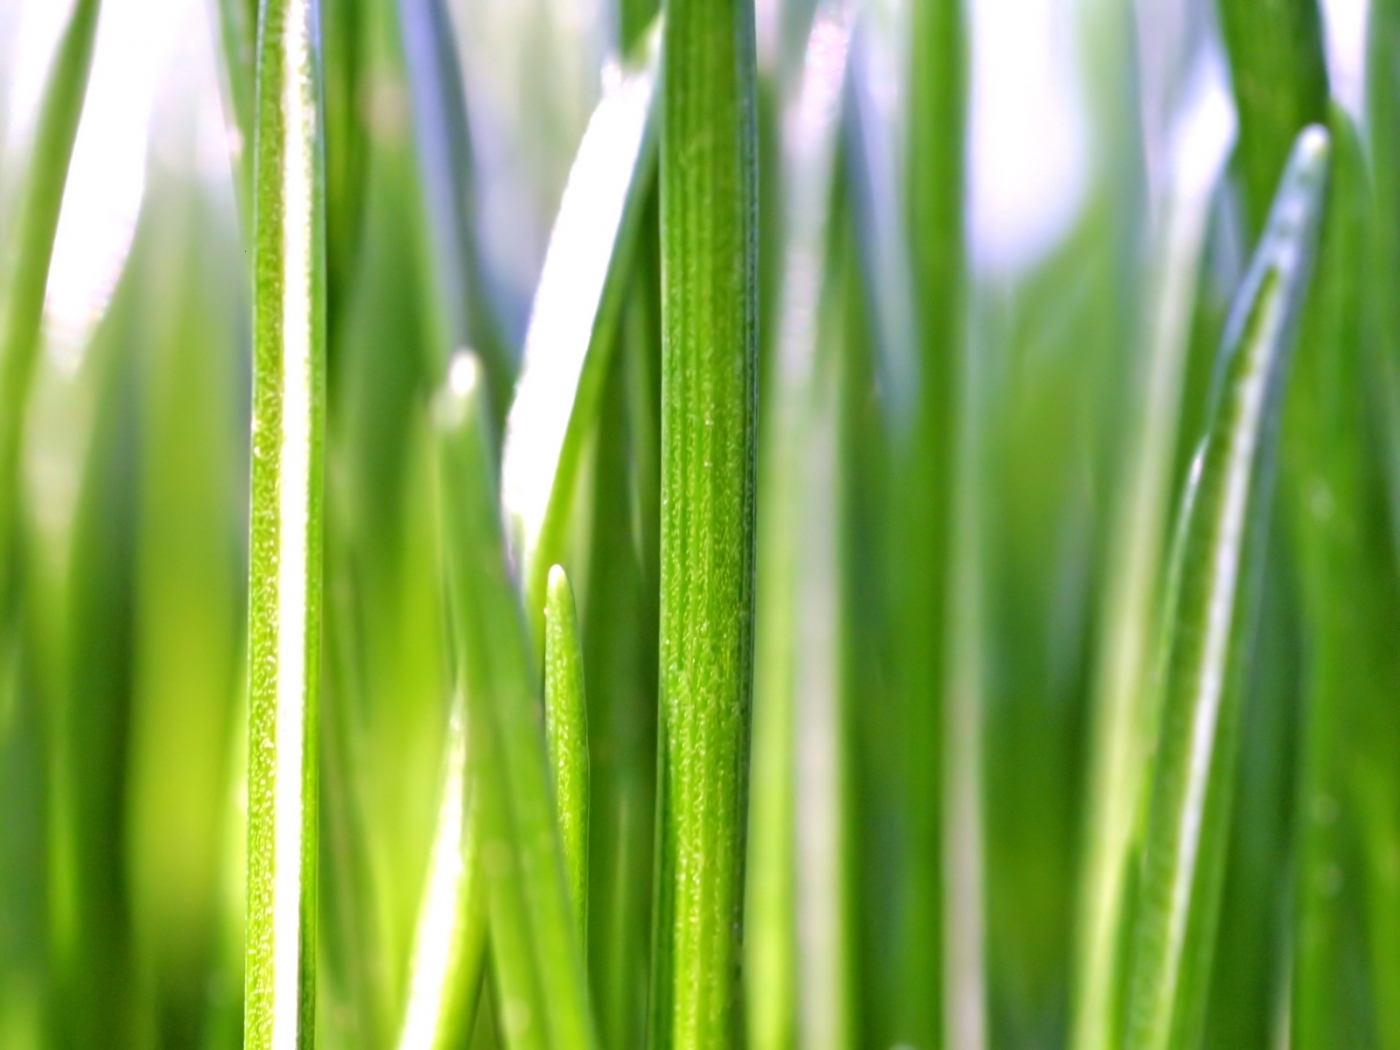 Mobile wallpaper: Plants, Grass, 23818 download the picture for free.